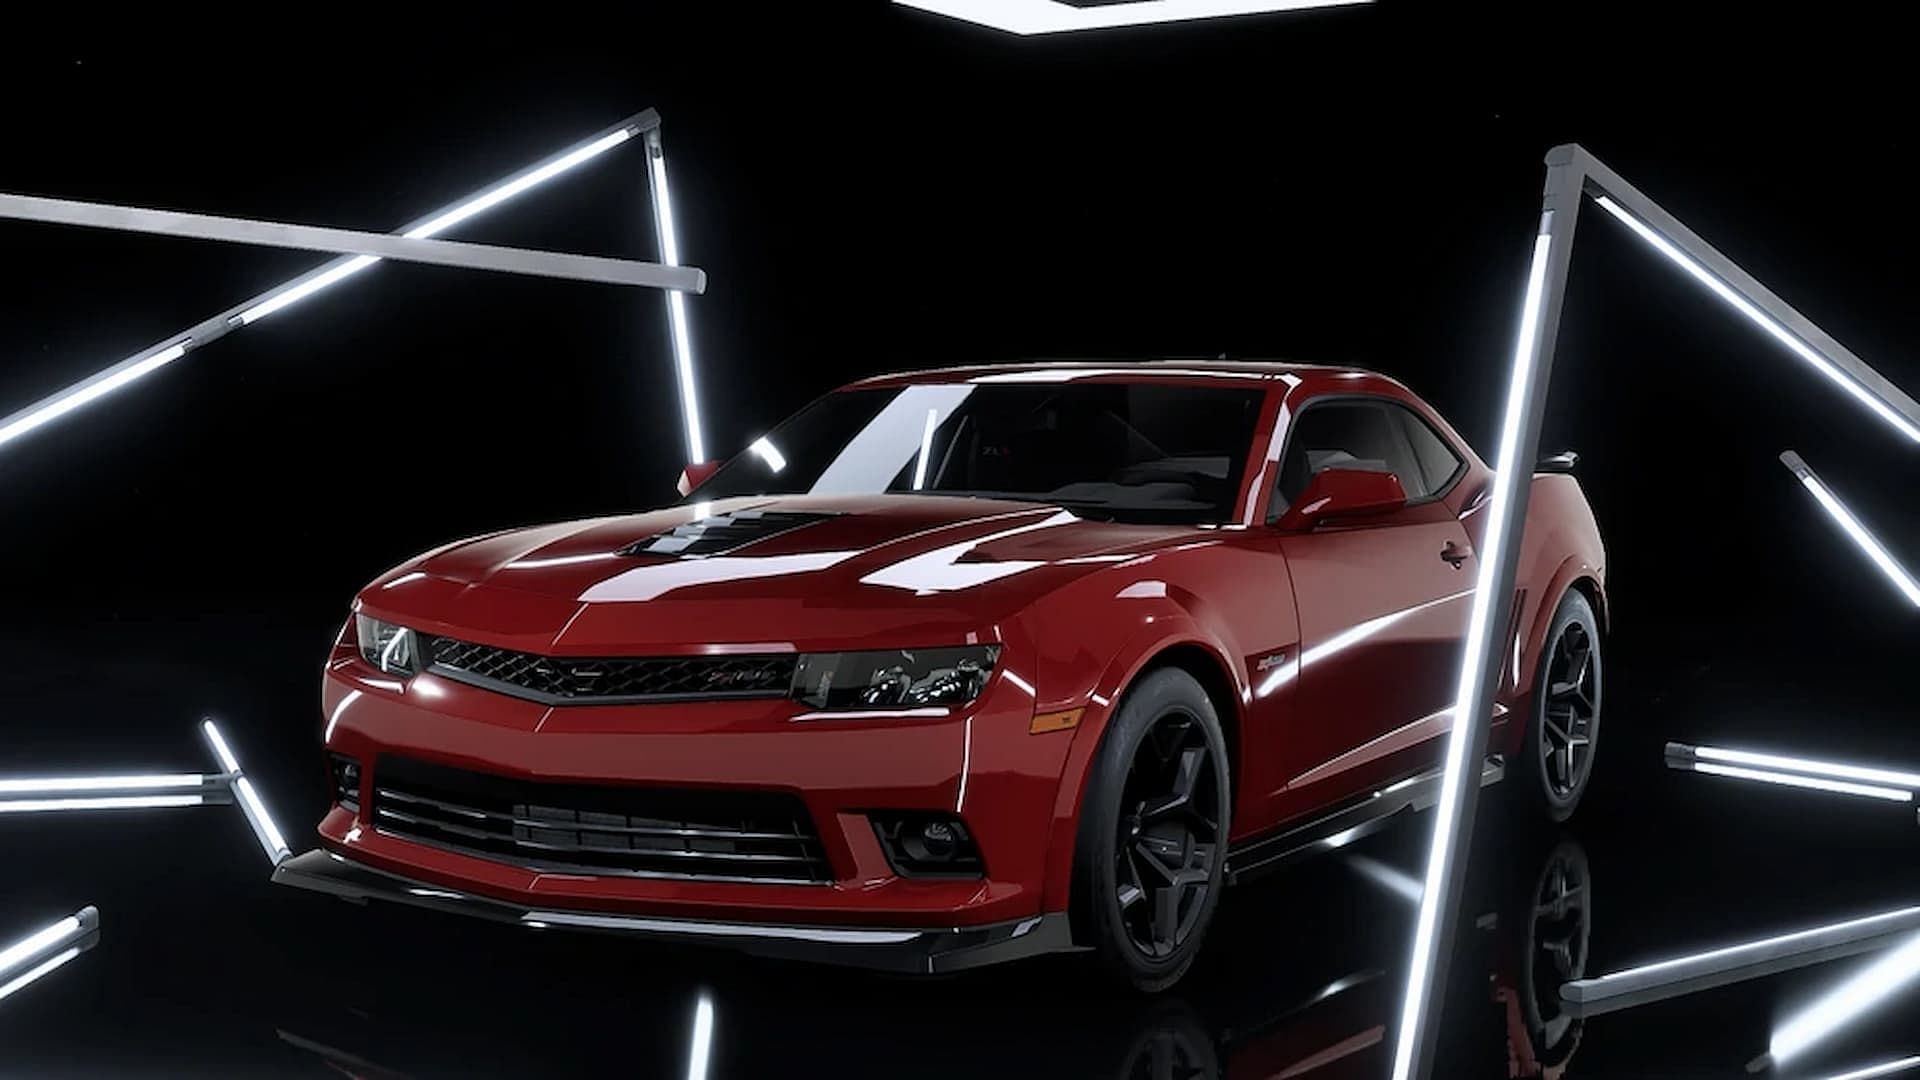 The Chevrolet Camaro Z28 is a powerhouse in the world of cars (Image via Electronic Arts)